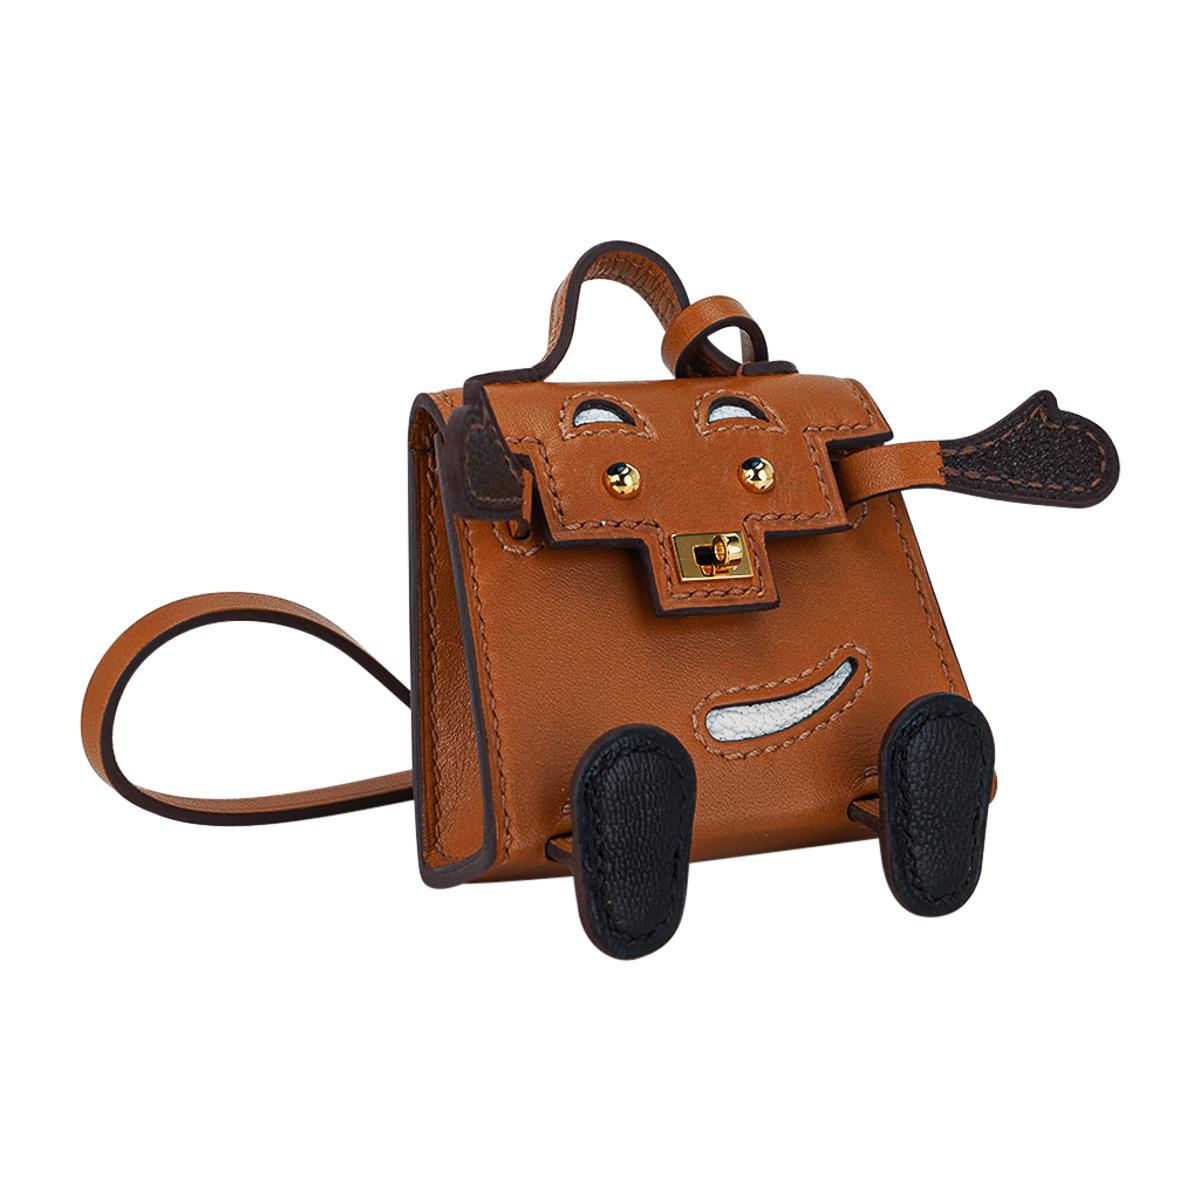 Mightychic offers a very rare limited edition Hermes Kelly Idole bag charm featured in  Sable, Havane, Black and Mushroom.
This playful Kelly Doll charm is created in Veau Butler and Chevre Mysore leathers.
Whimsical and delightful this fabulous